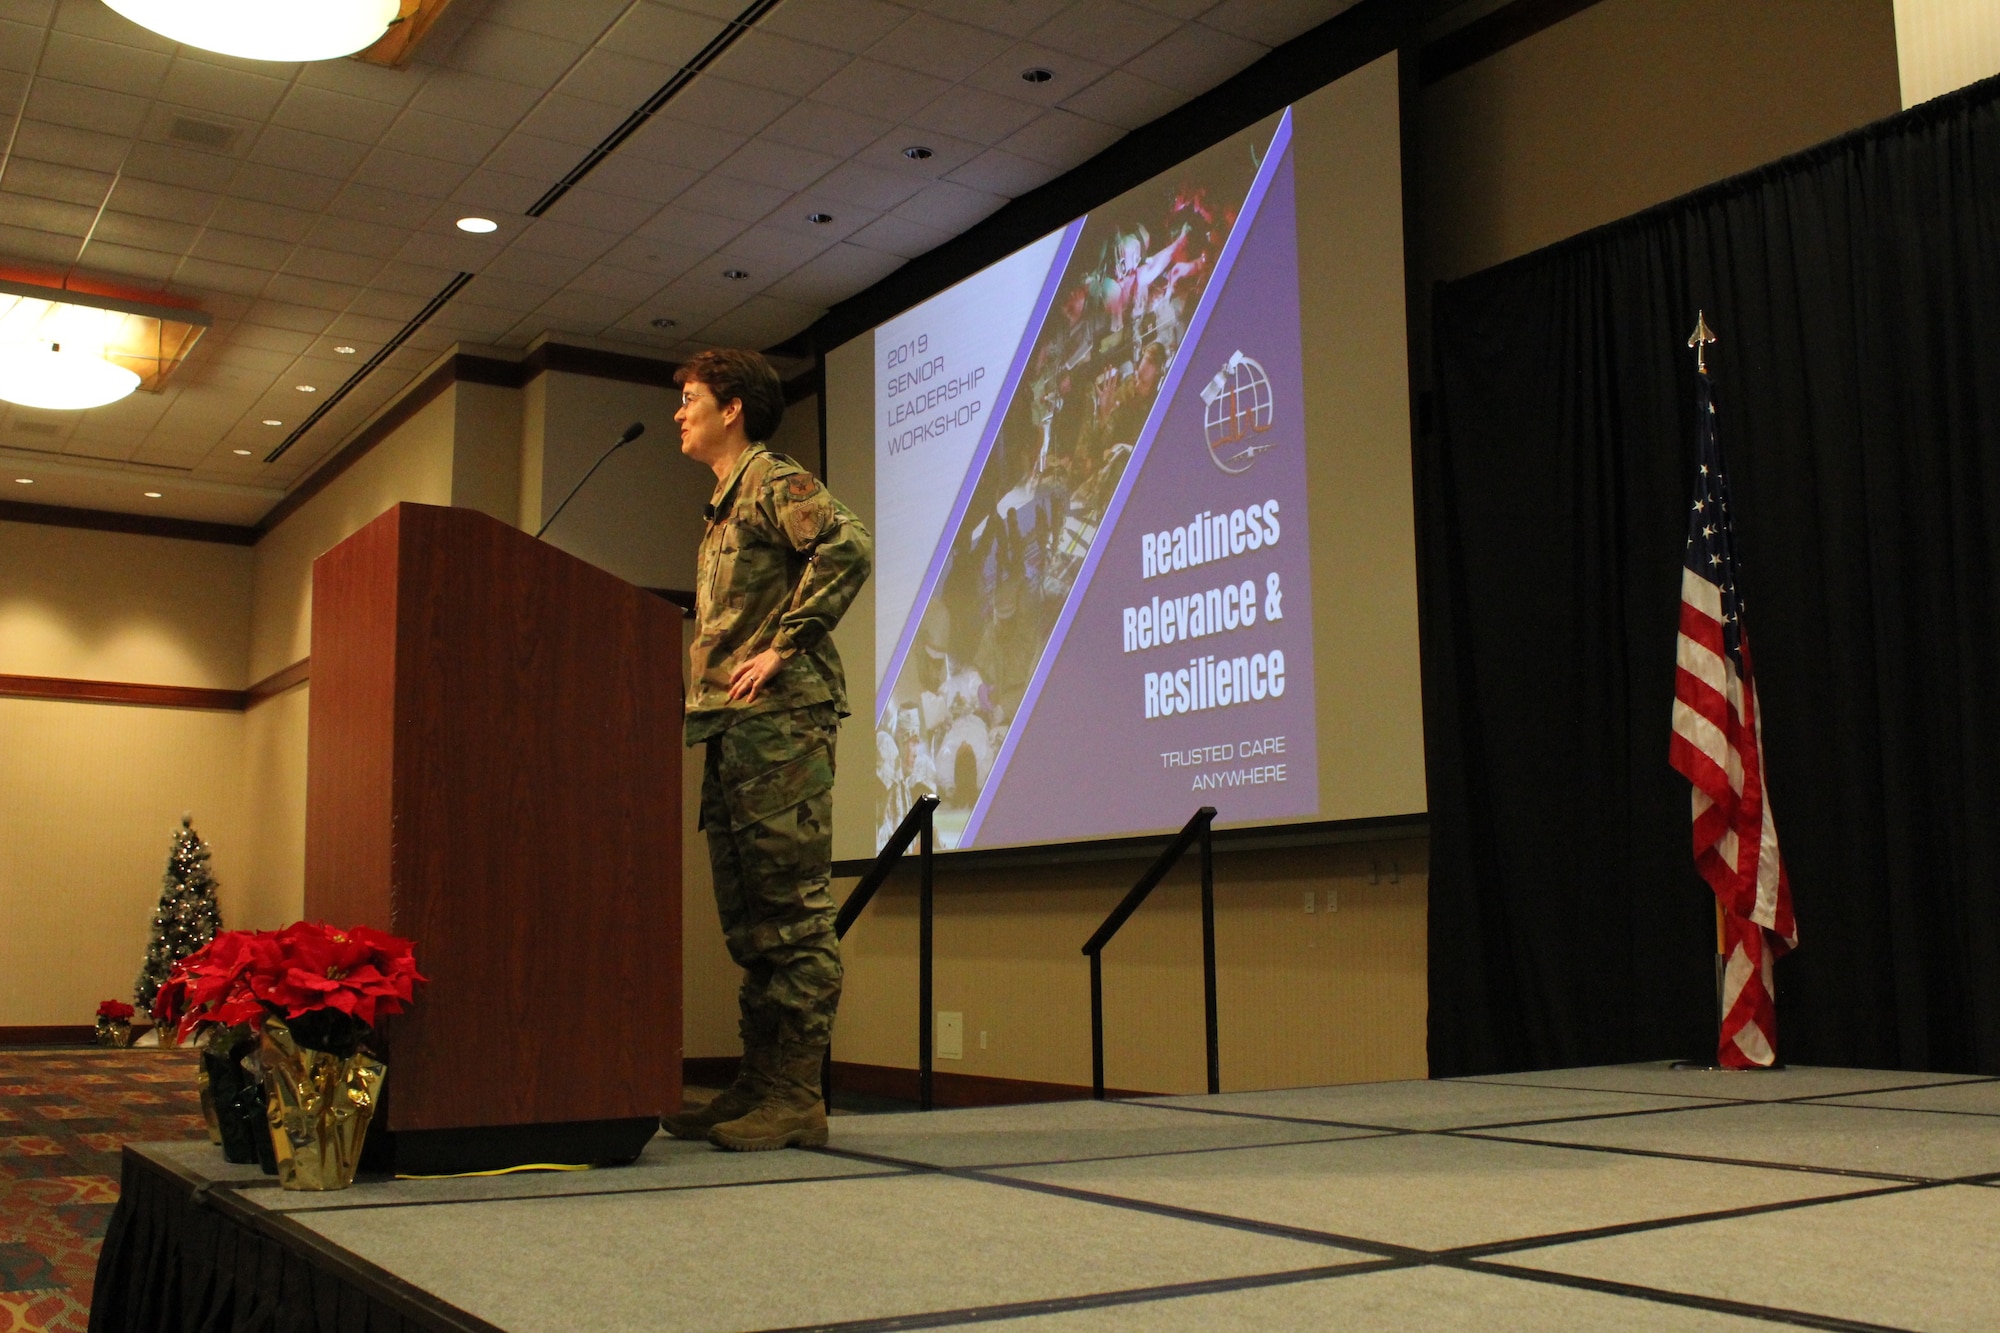 U.S. Air Force Lt. Gen. Jacqueline Van Ovost, Director of Staff, Headquarters Air Force, spoke to leaders at the Air Force Medical Service 2019 Senior Leadership Workshop in Leesburg, Virginia, Dec. 3, 2019. Van Ovost expressed appreciation for medics and acknowledged the importance they have in generating combat power. (U.S. Air Force photo by Josh Mahler)